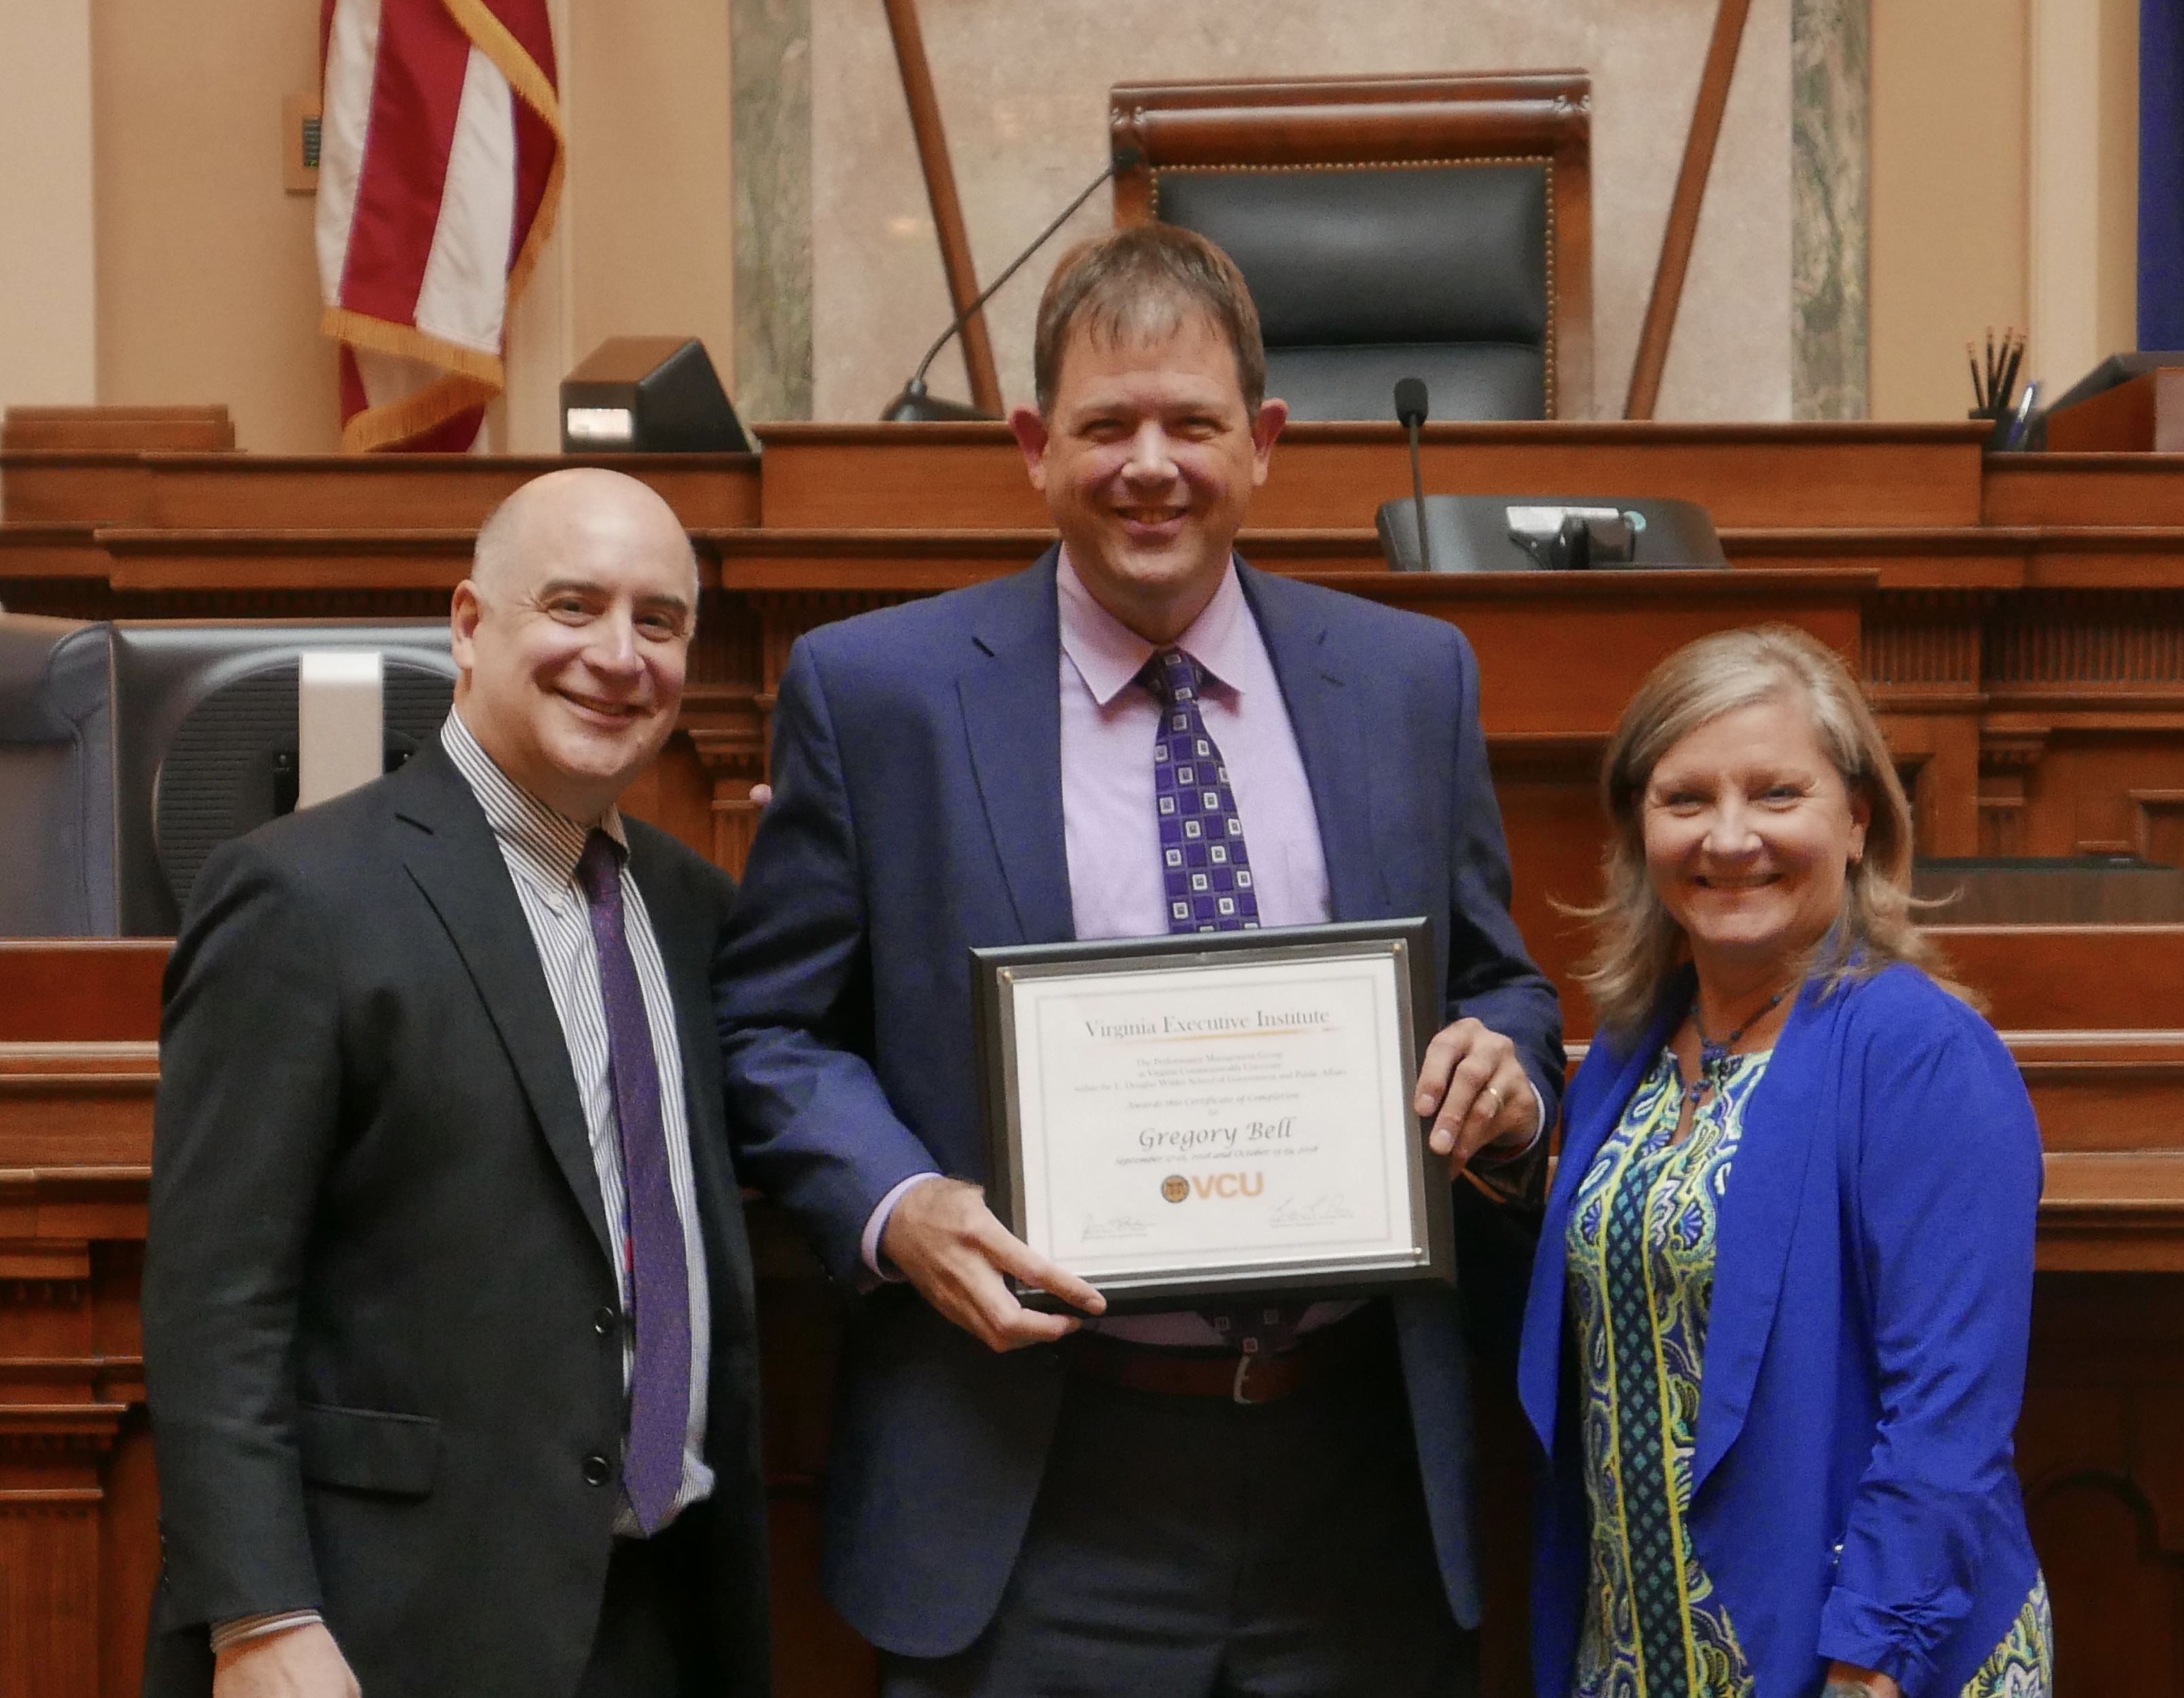 Fall 2018 VEI graduate, Greg Bell, with James Burke and Linda Pierce at graduation at the state Capitol.